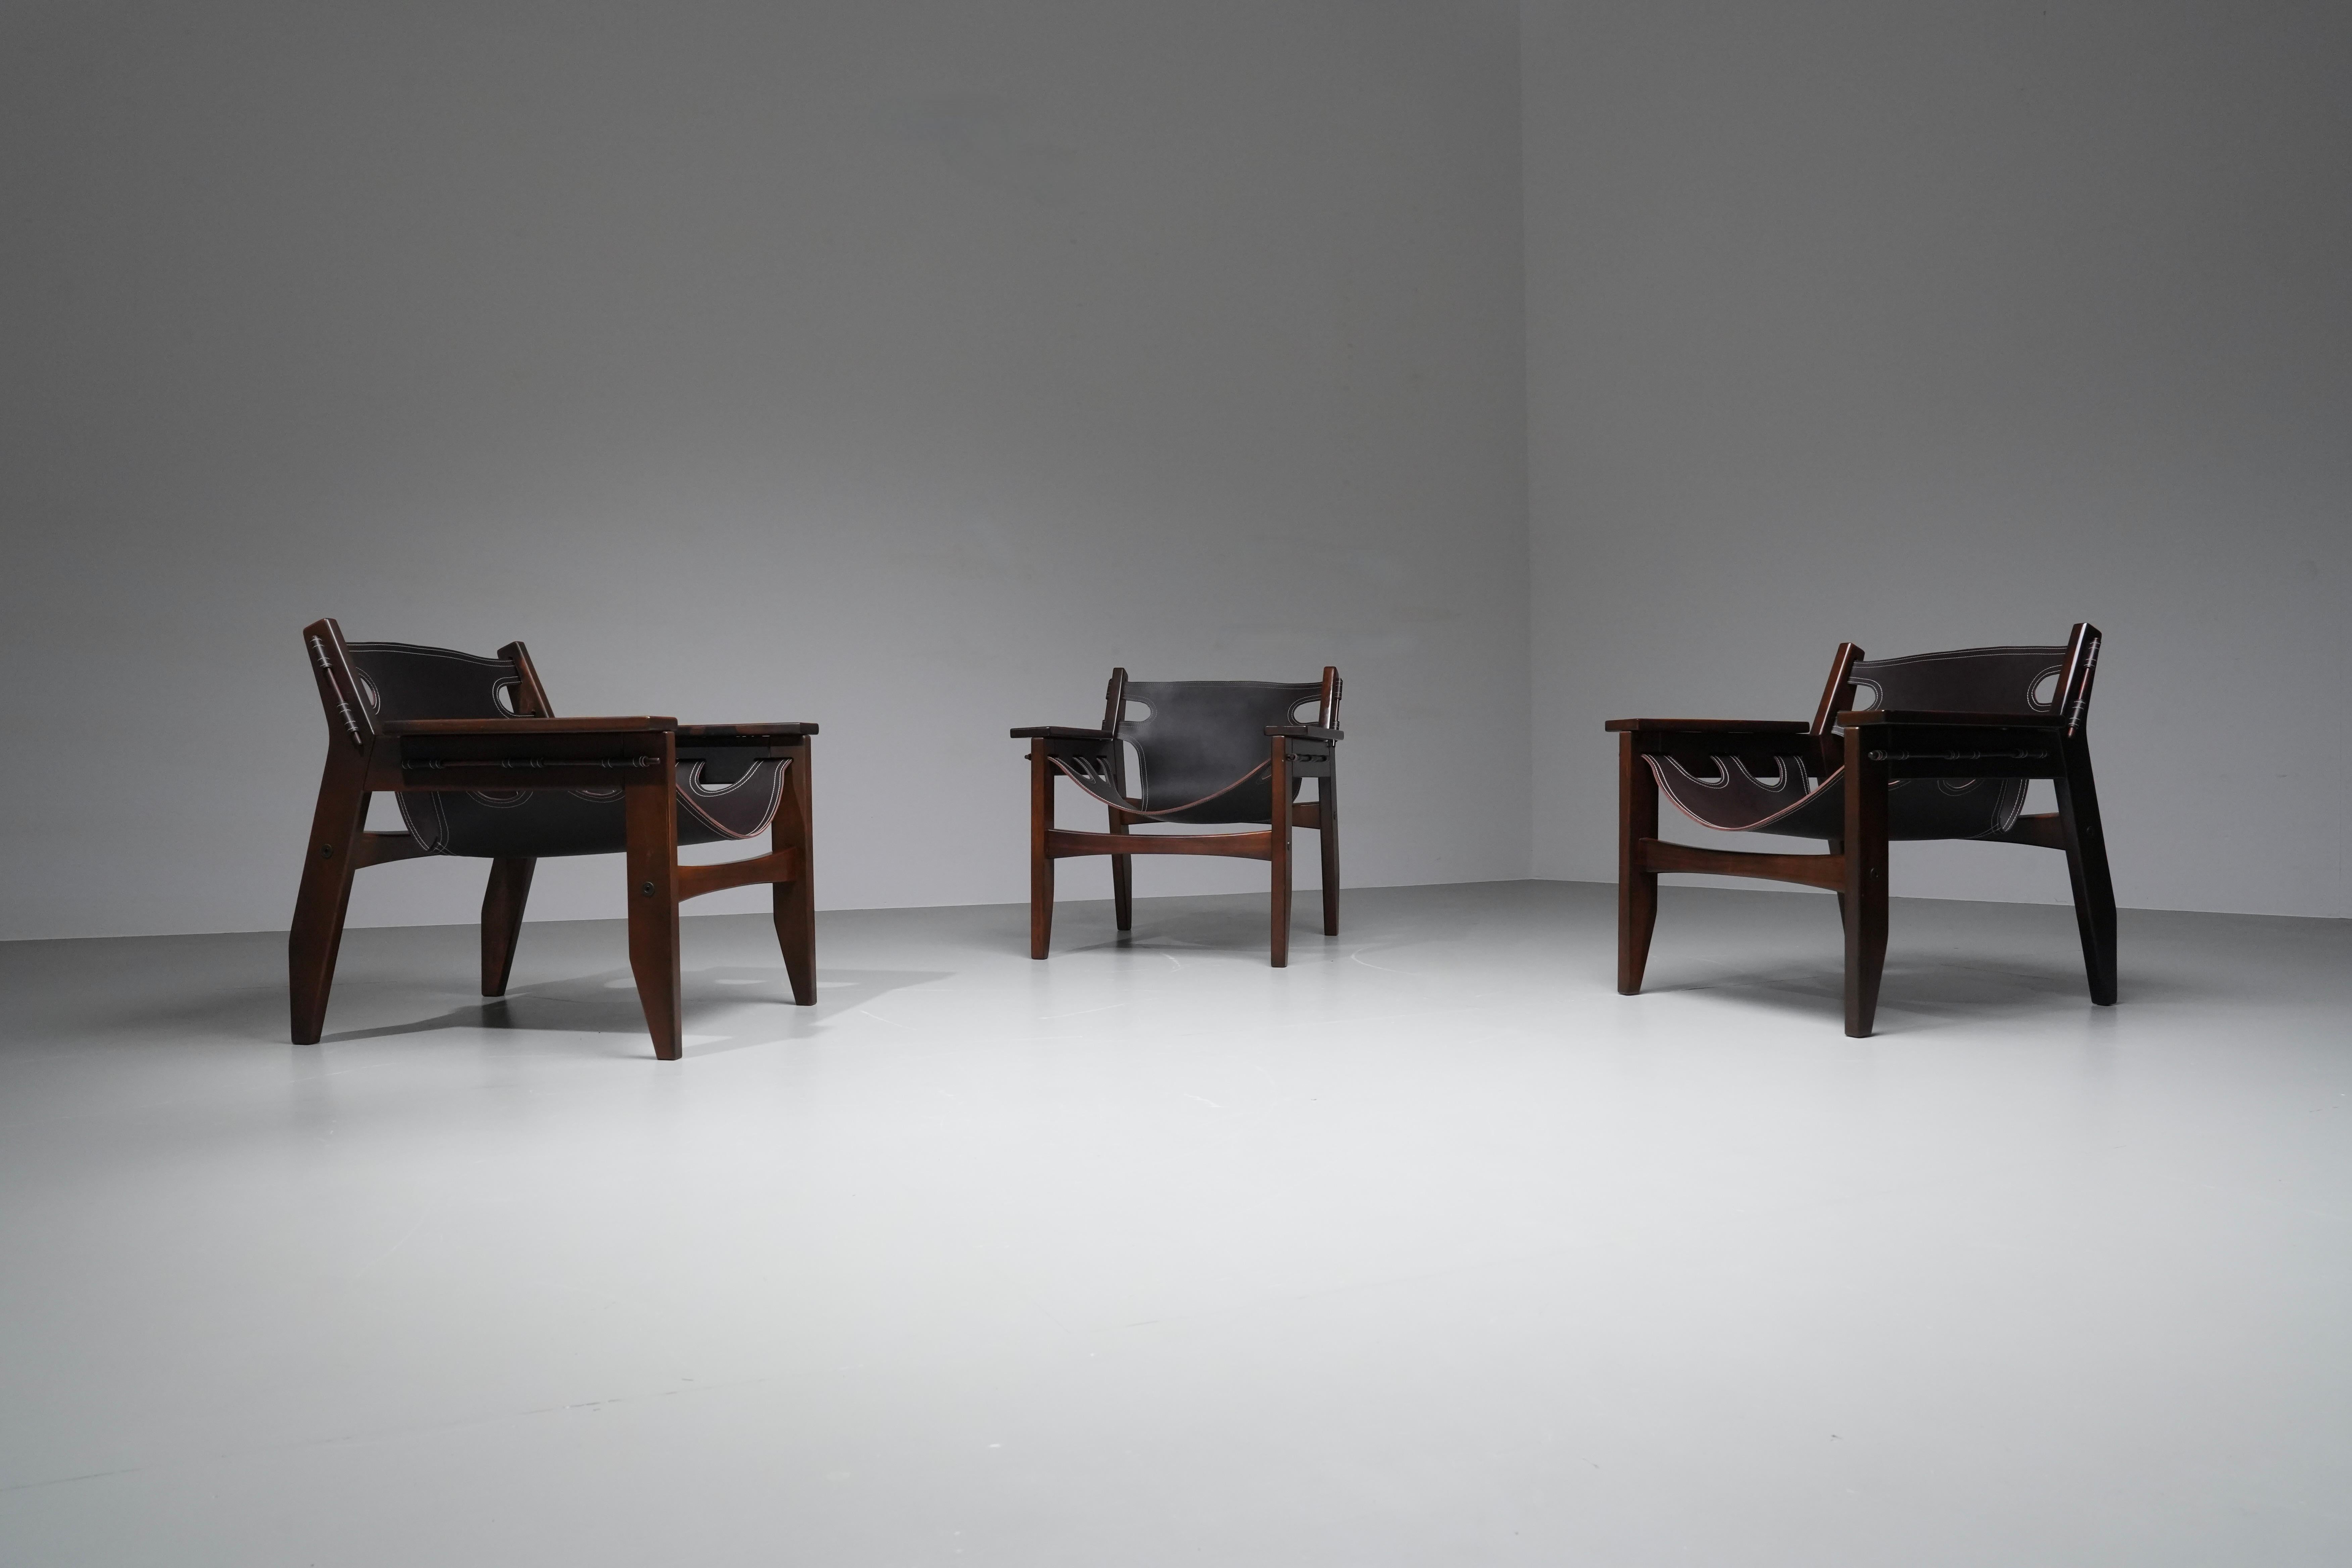 Exceptional set of Kilin chairs by Brazilian architect Sergio Rodrigues. Made dark wood and high quality saddle leather these chairs have become truly iconic over the years. The open spaces in the dark brown leather give these chairs a semi-light